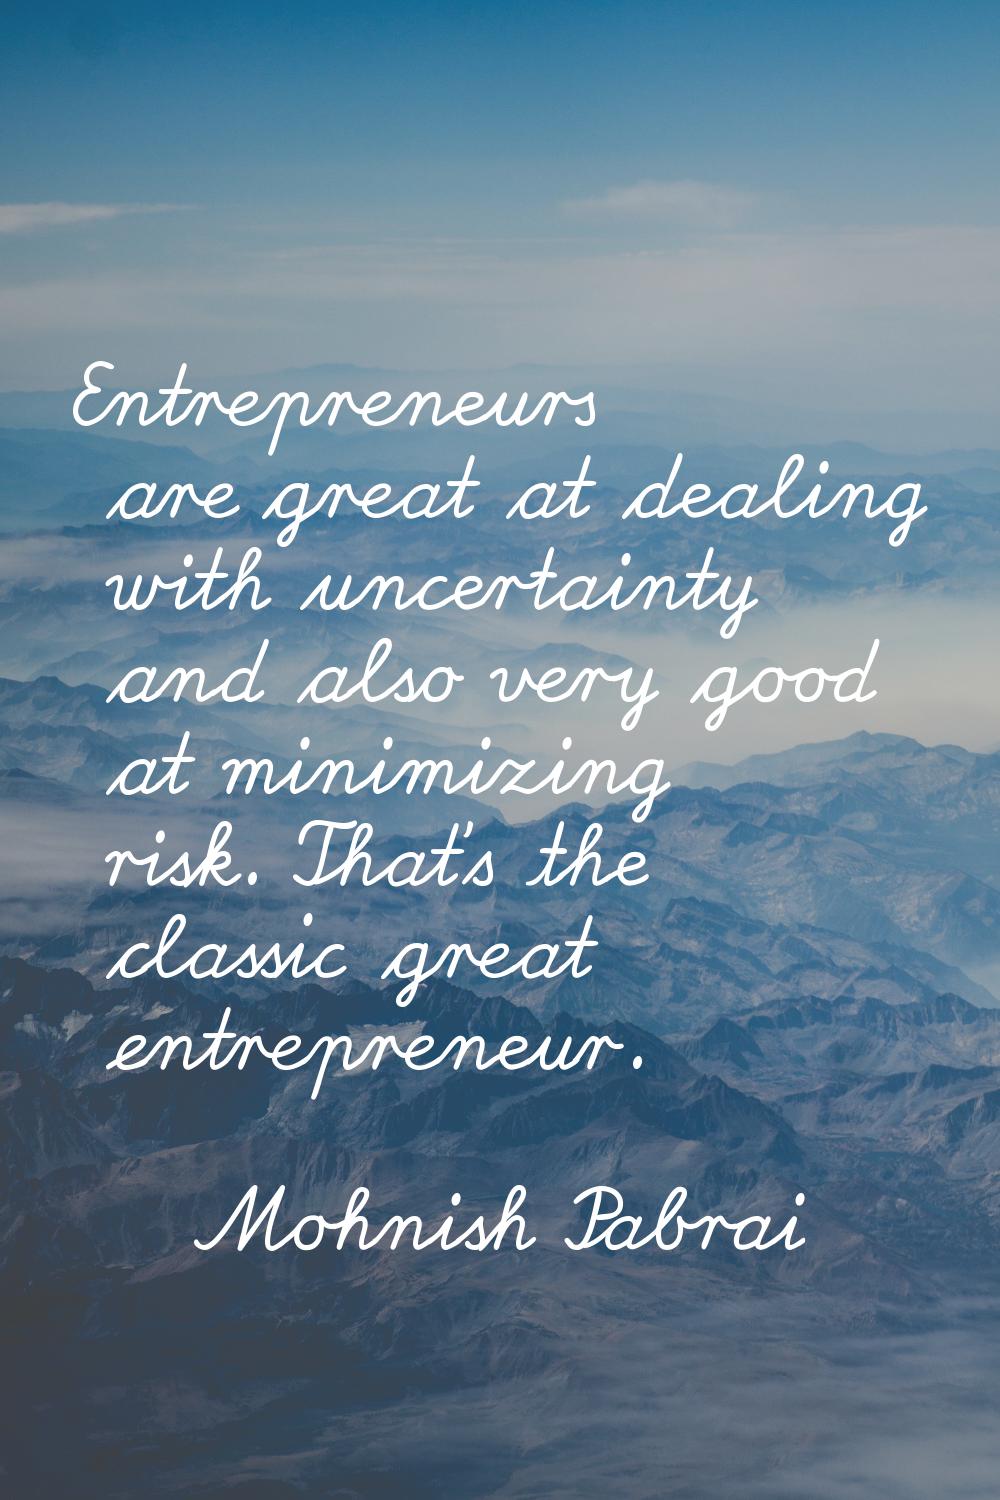 Entrepreneurs are great at dealing with uncertainty and also very good at minimizing risk. That's t